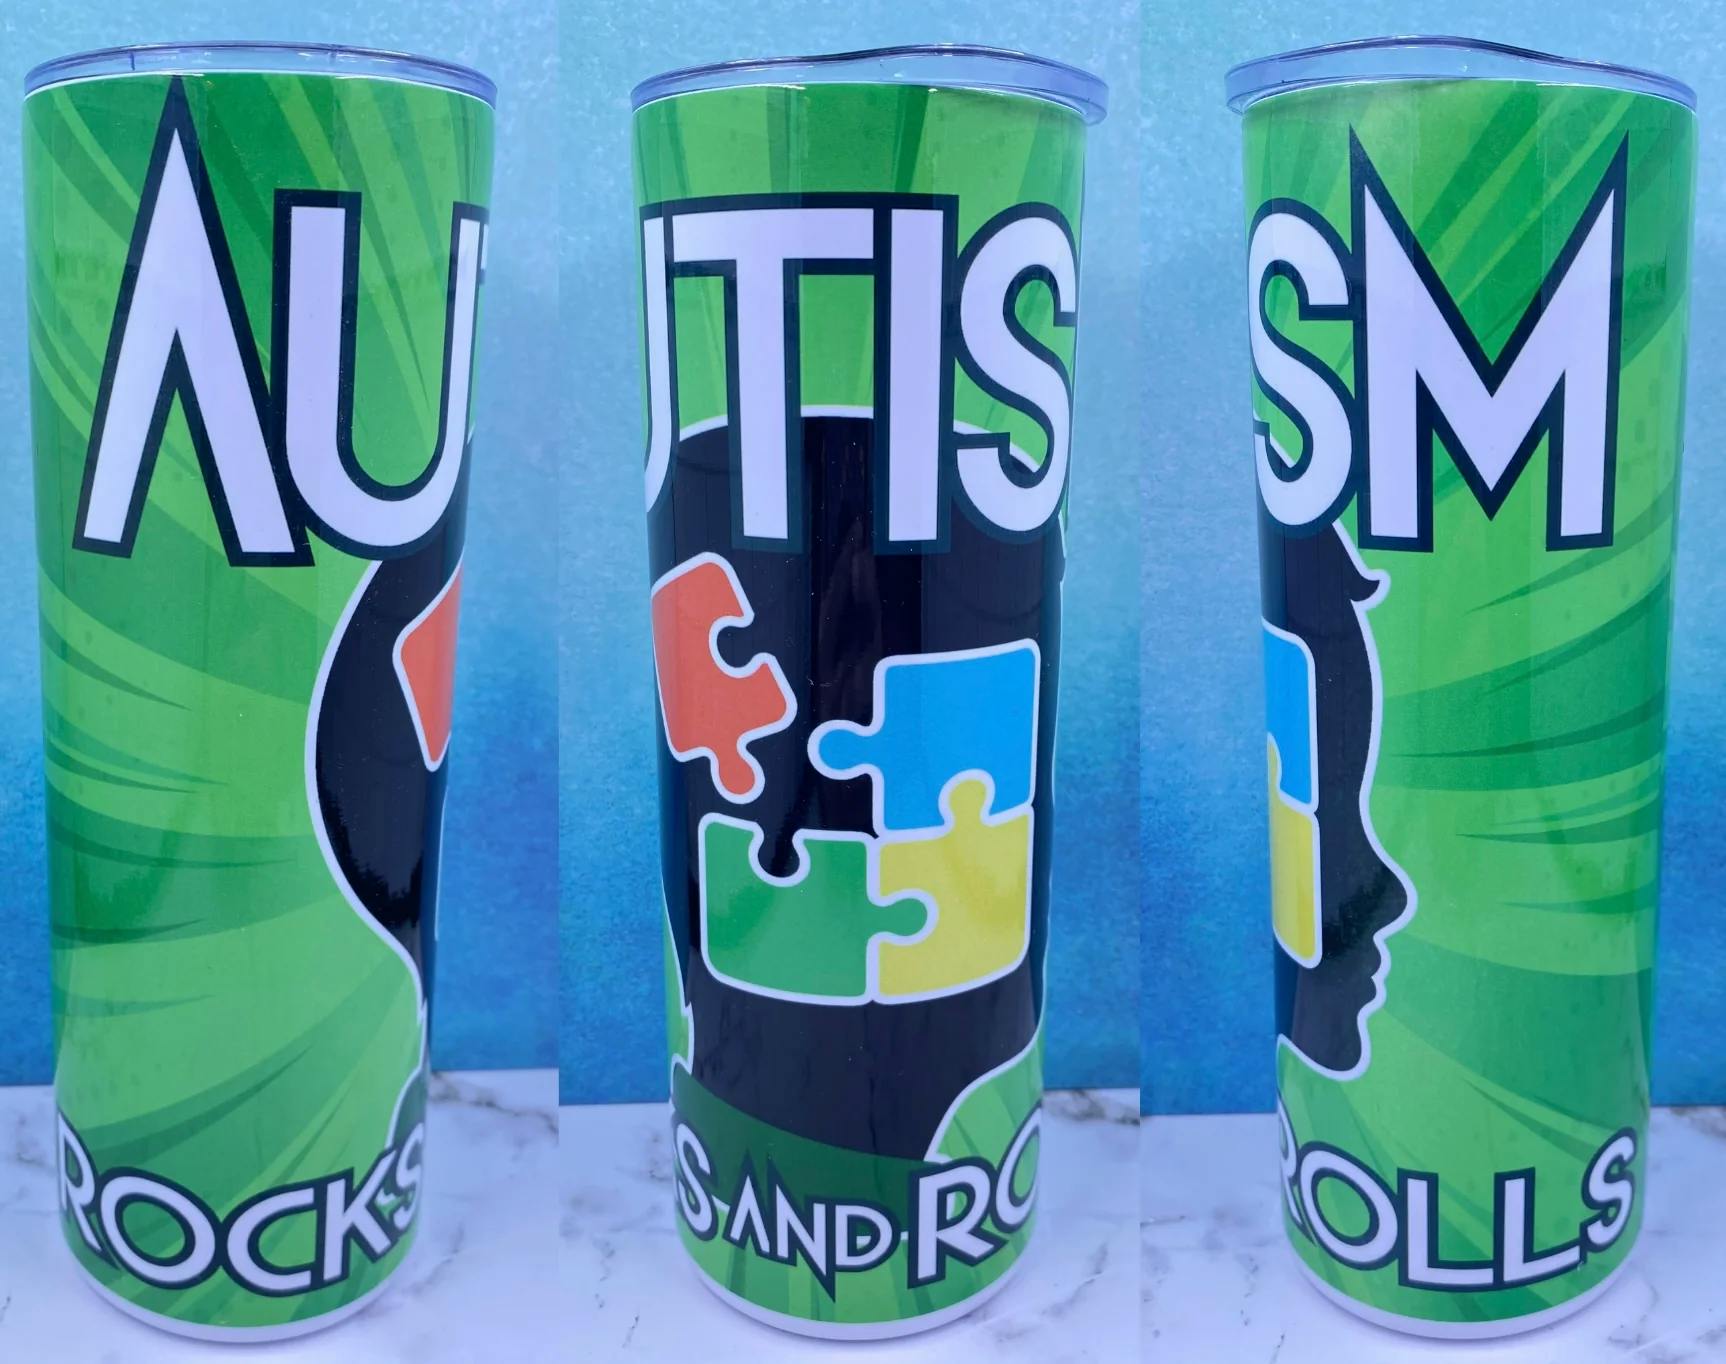 Autism Rocks and Rolls tumbler. Entire tumbler displays the Autism Rocks and Rolls logo.